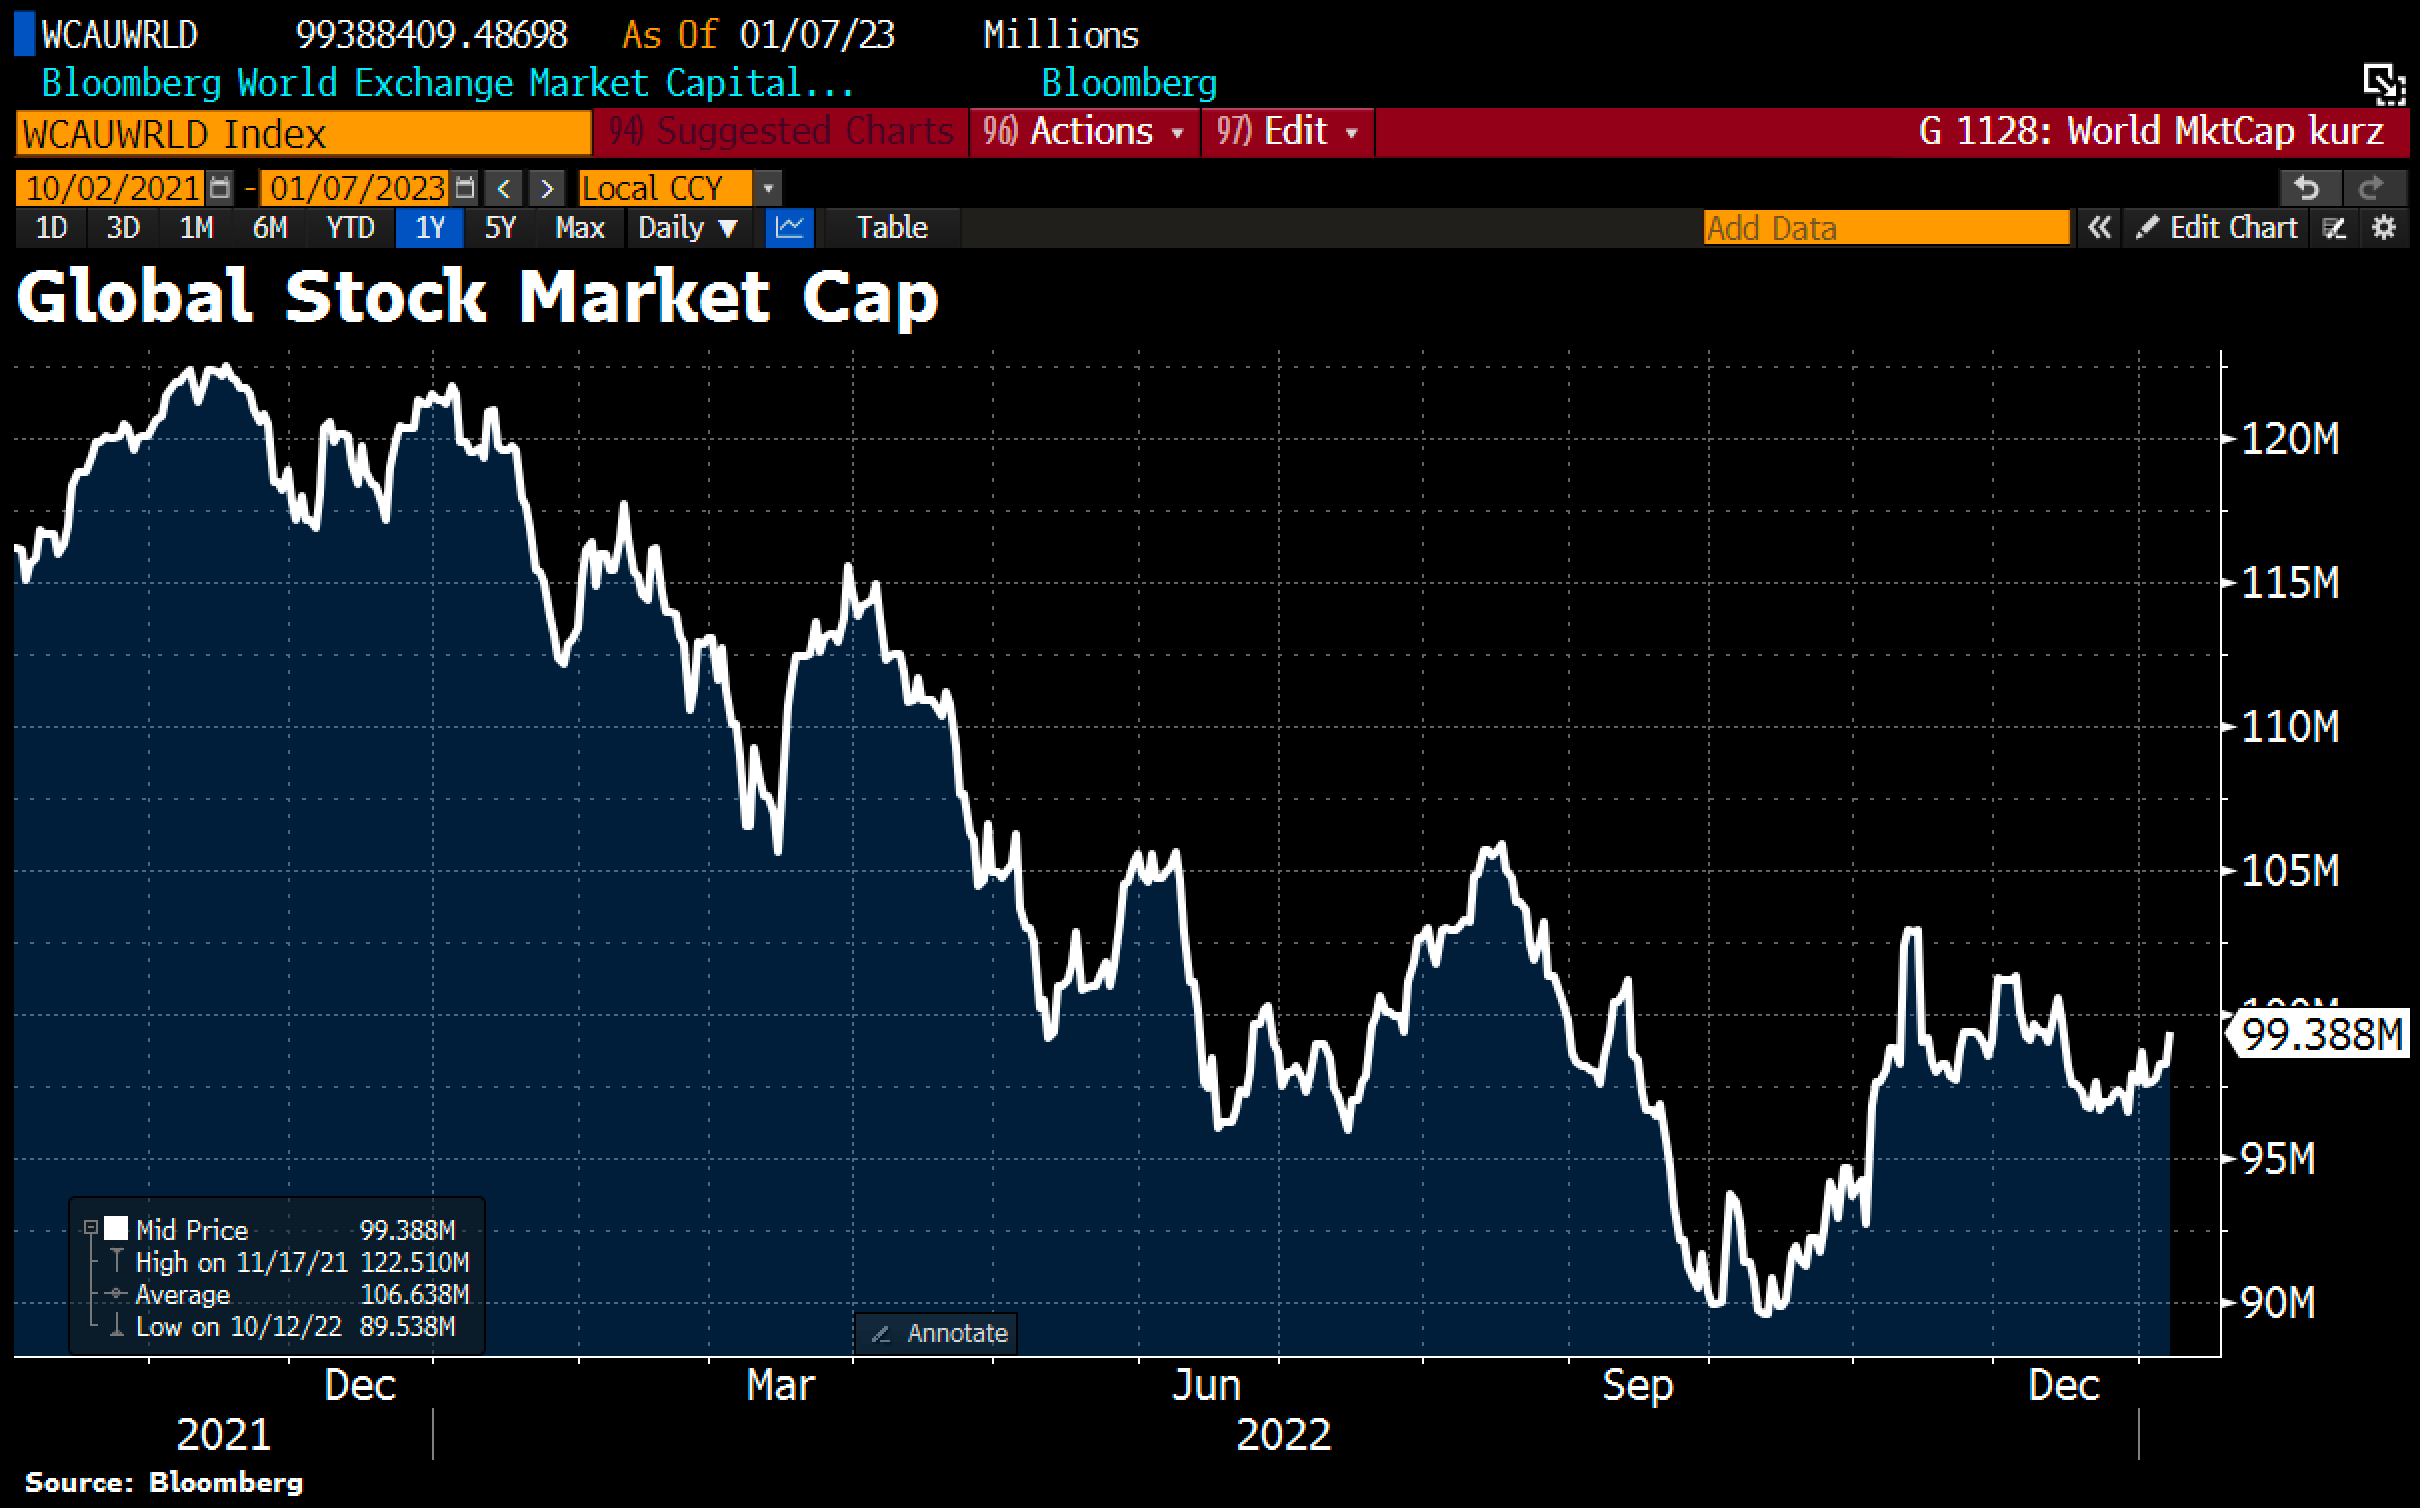 Global stocks have gained $1.8tn in market cap during the 1st week of trading of the year